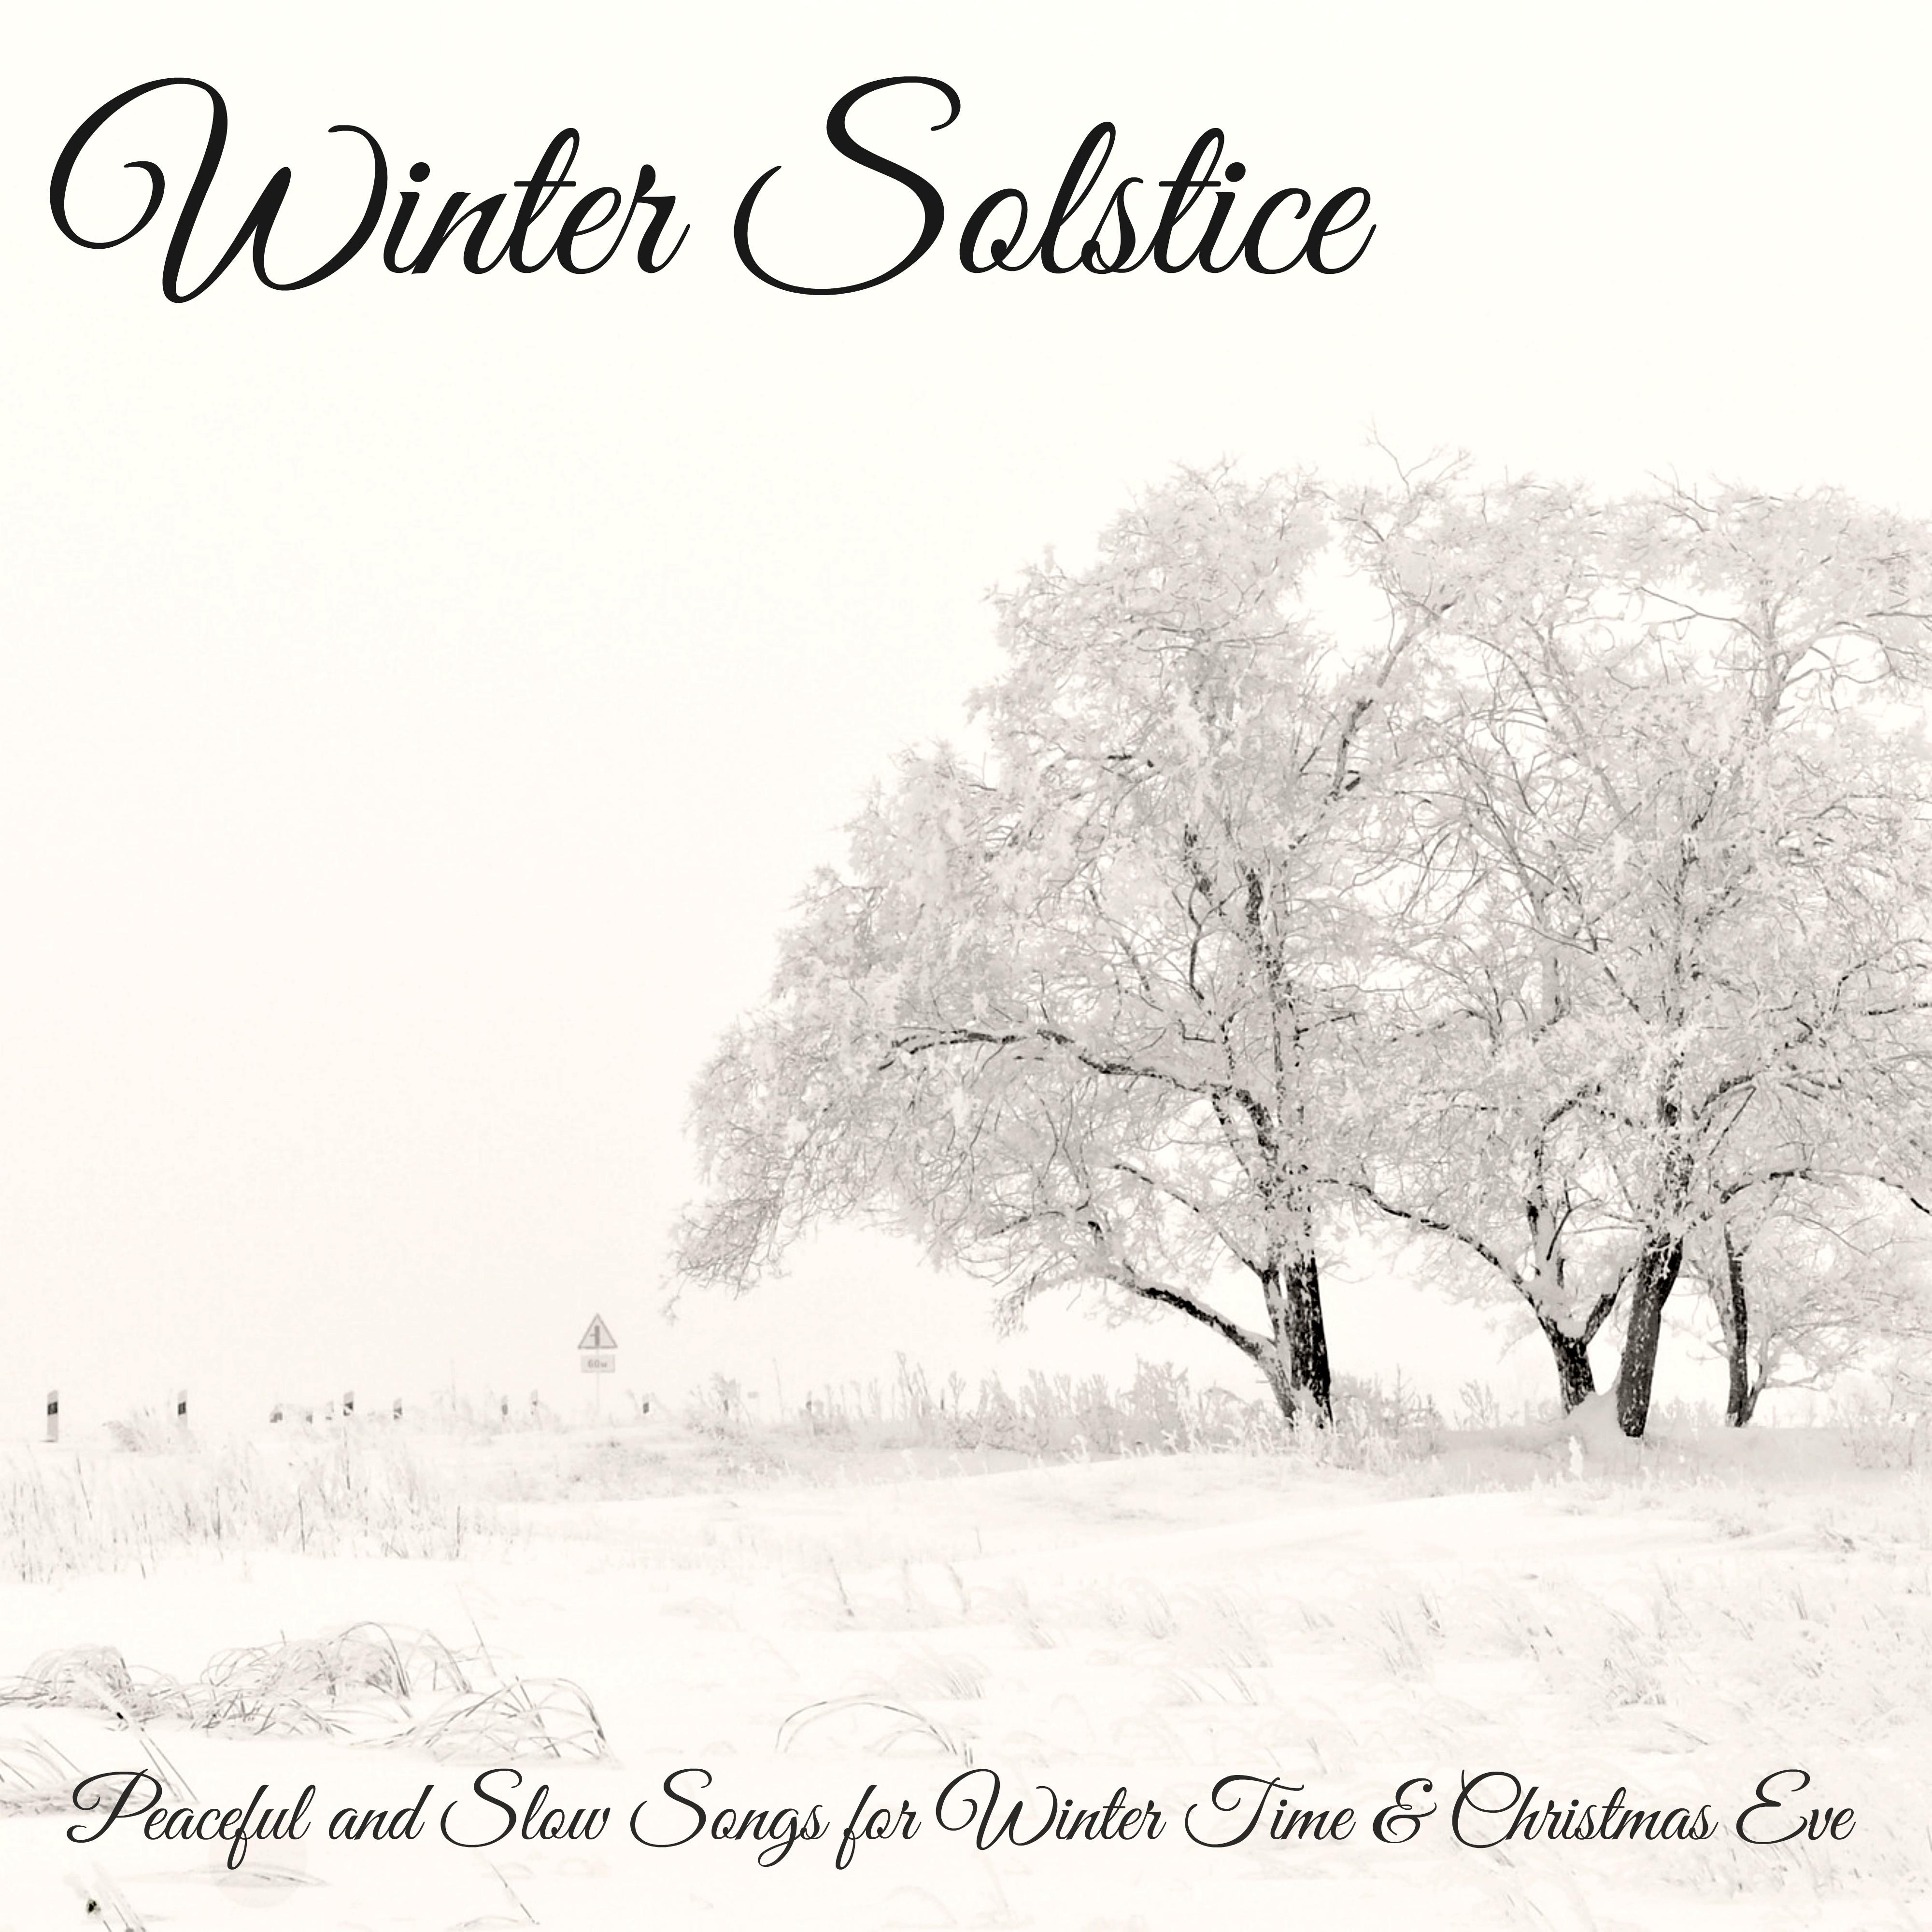 Winter Solstice – Peaceful and Slow Songs for Winter Time & Christmas Eve